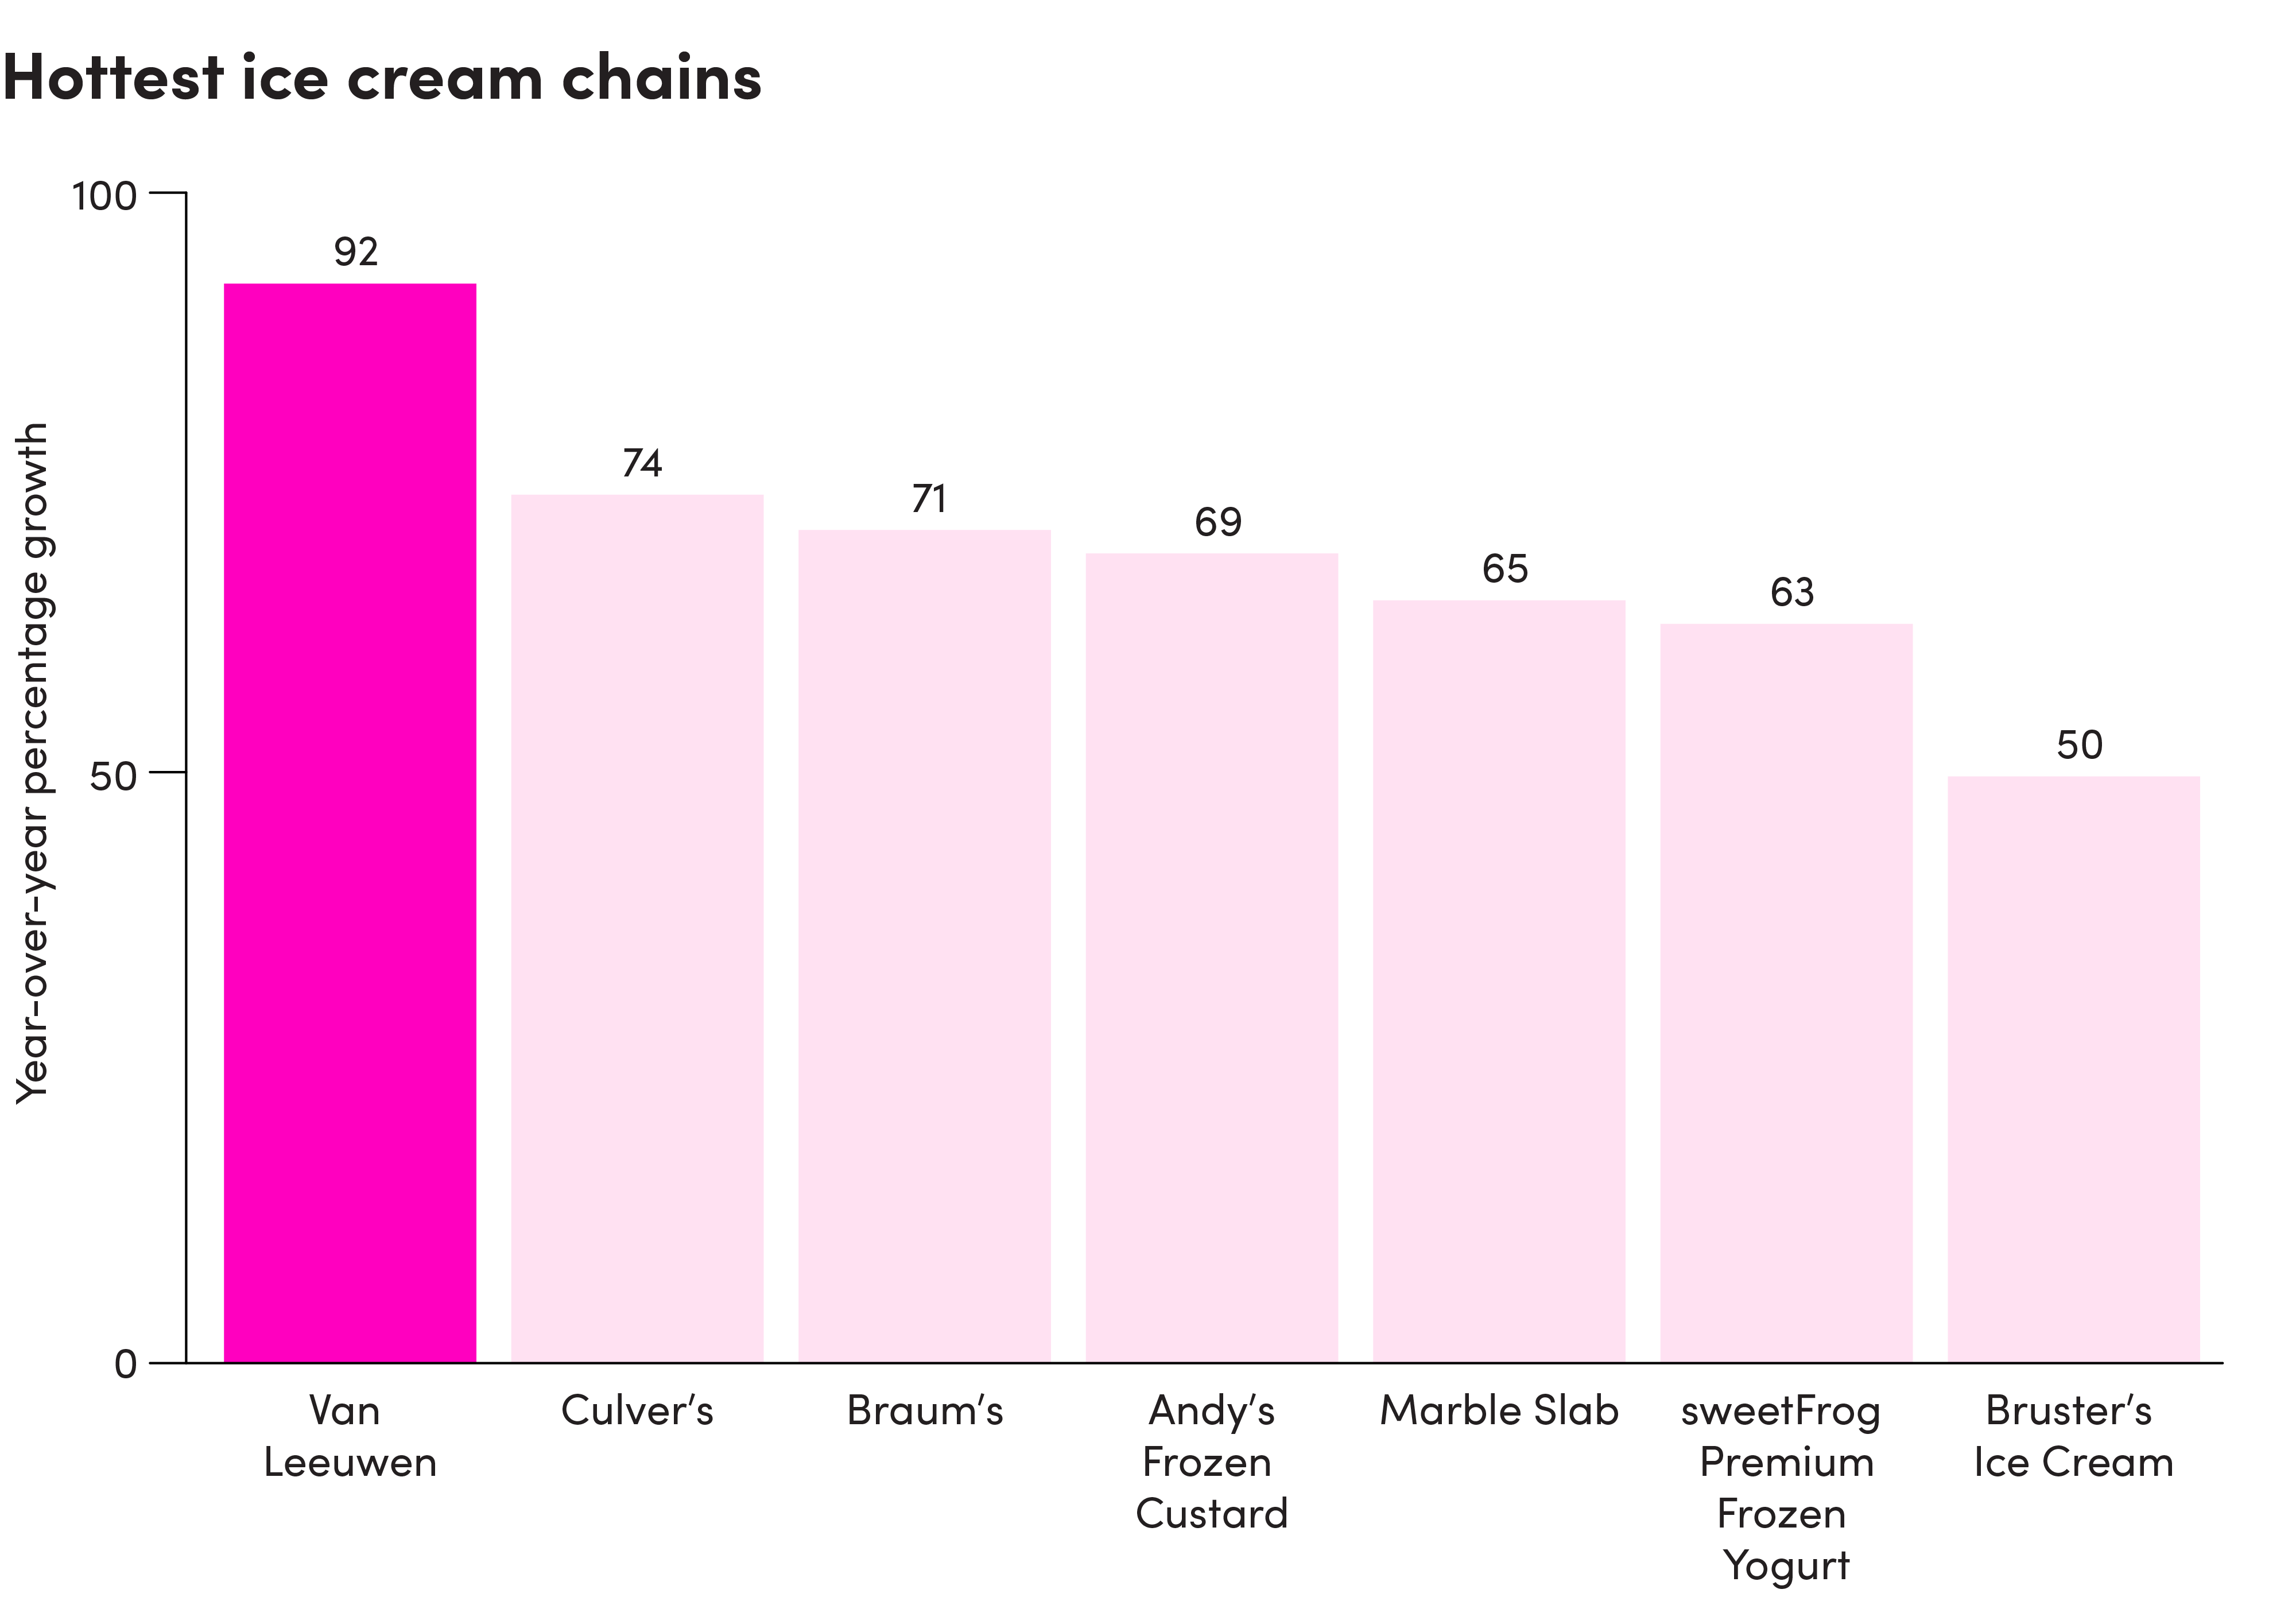 Bar chart showing names of hottest ice cream chains